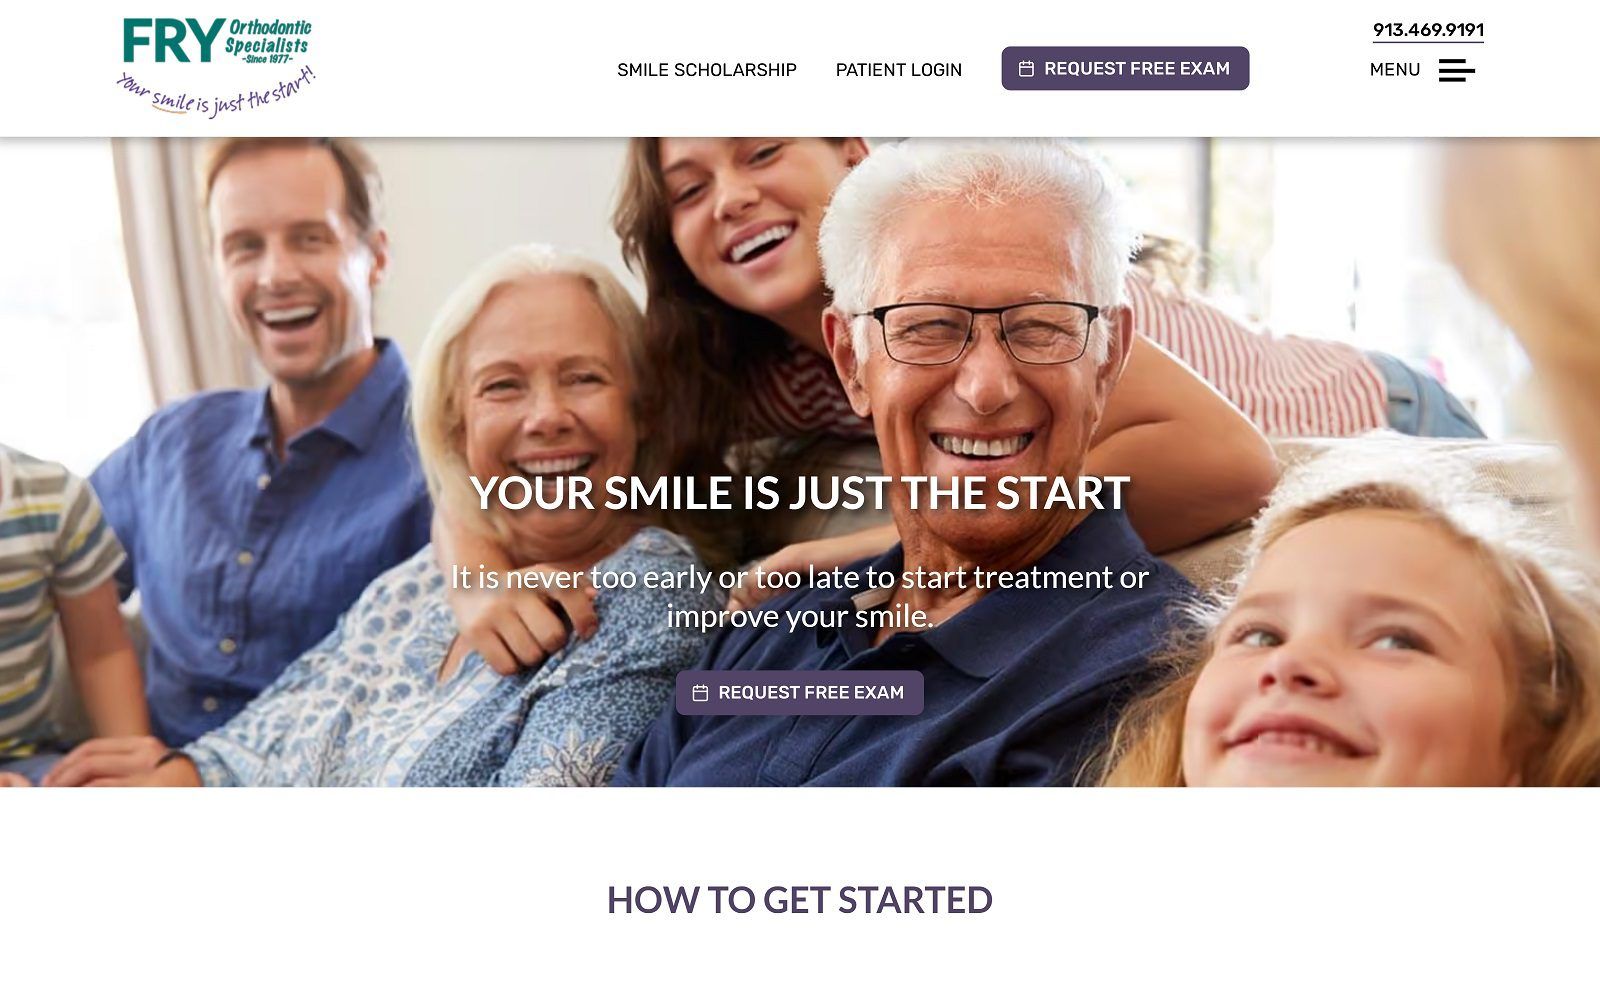 The screenshot of fry orthodontic specialists website